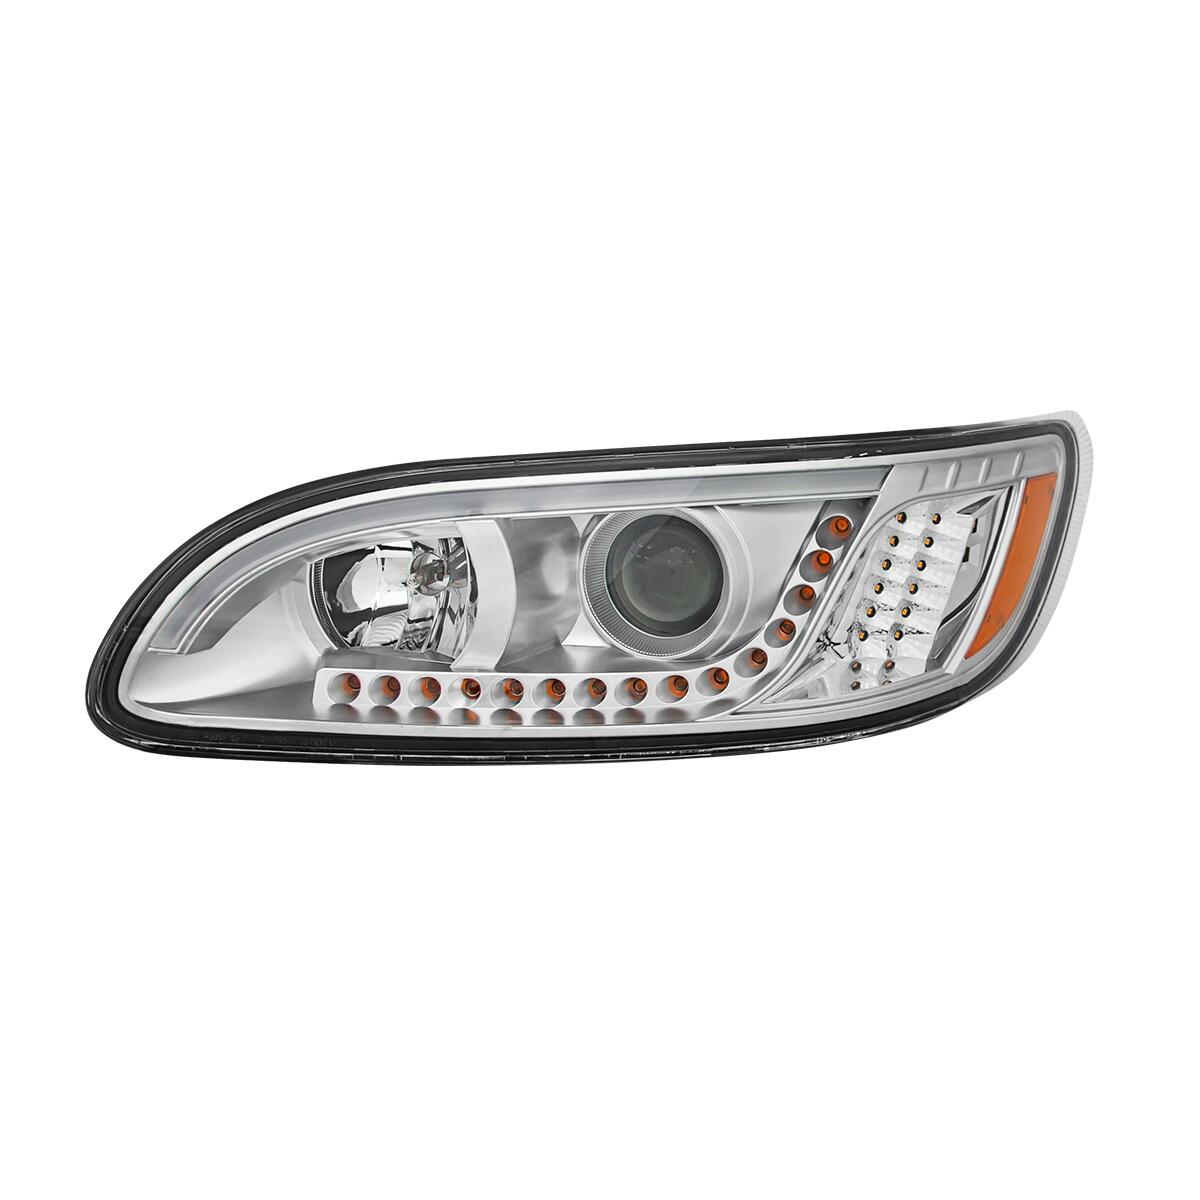 Peterbilt 386 (2006-2015) / 387 (2001-2011) Chrome Headlight with White High Power LED Position/Daytime Running and LED Turn Signal Light - Driver Side